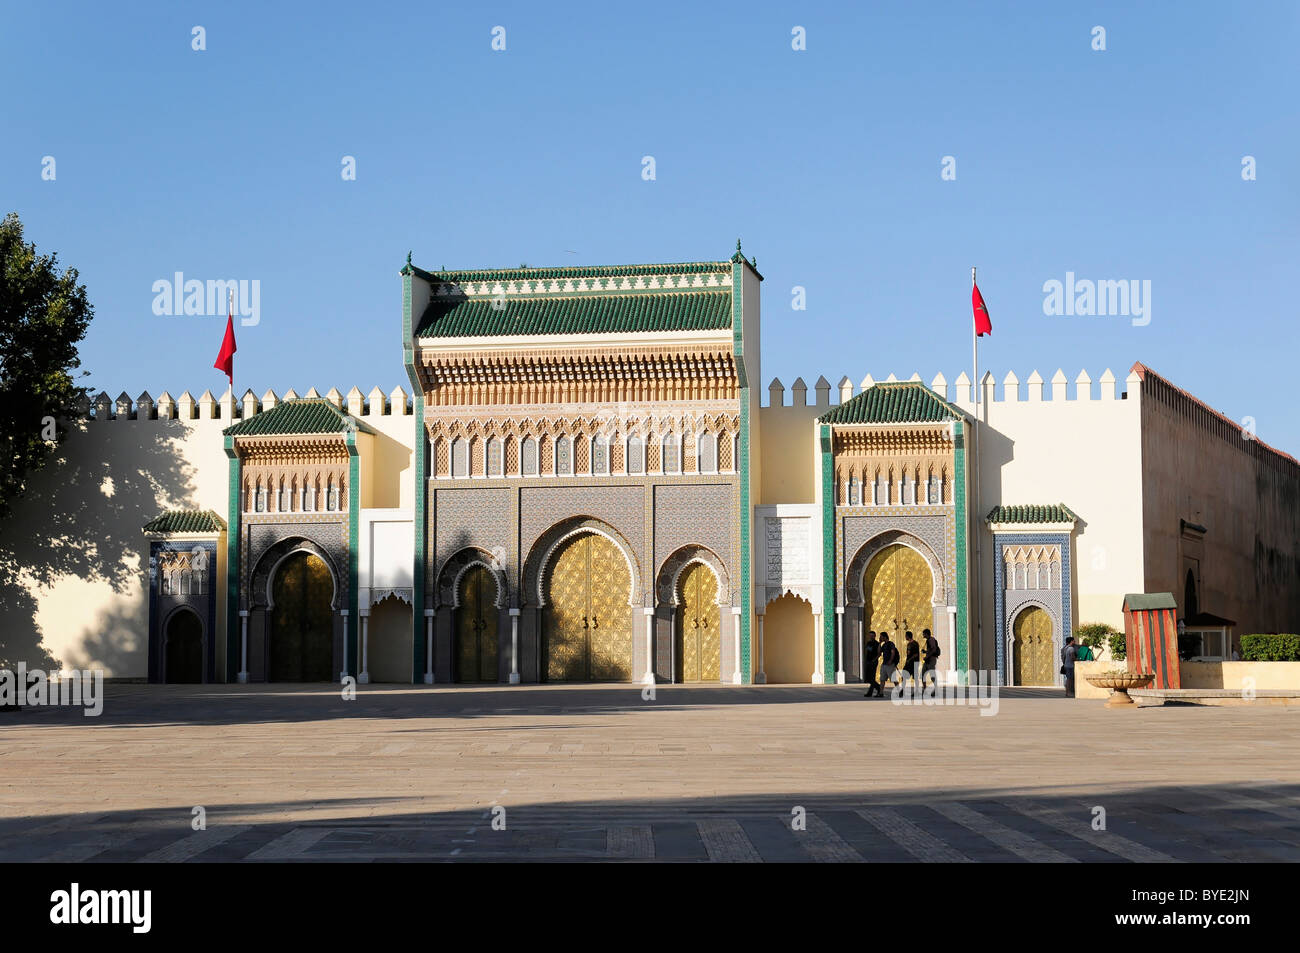 Artfully crafted portal of Dar el-Makhzen or Sultanate Palace of the Alawis, Fes El-Jdid, entrance of the Royal Palace, Morocco Stock Photo